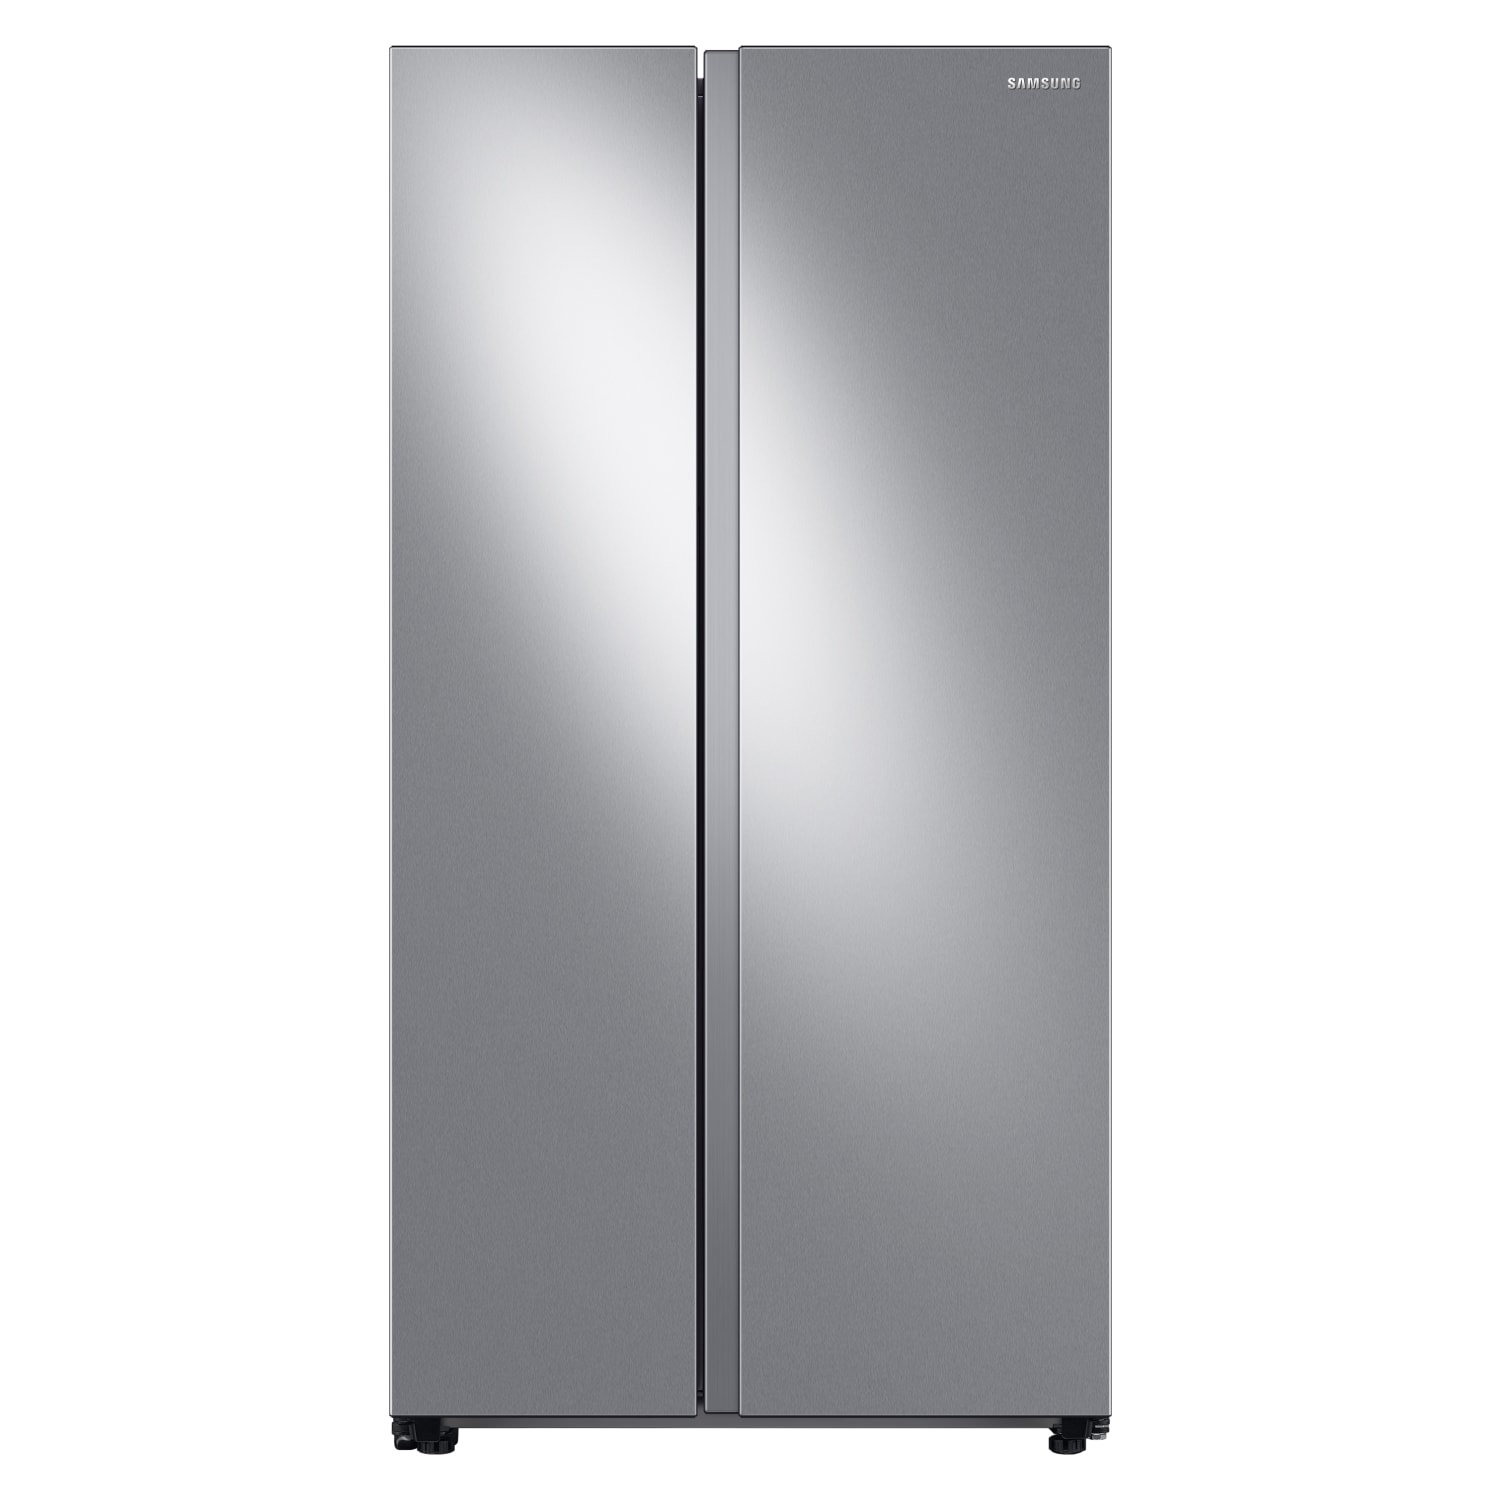 Samsung 27.4 cu. ft. Smart Side-by-Side Refrigerator with Large Capacity - Stainless Steel